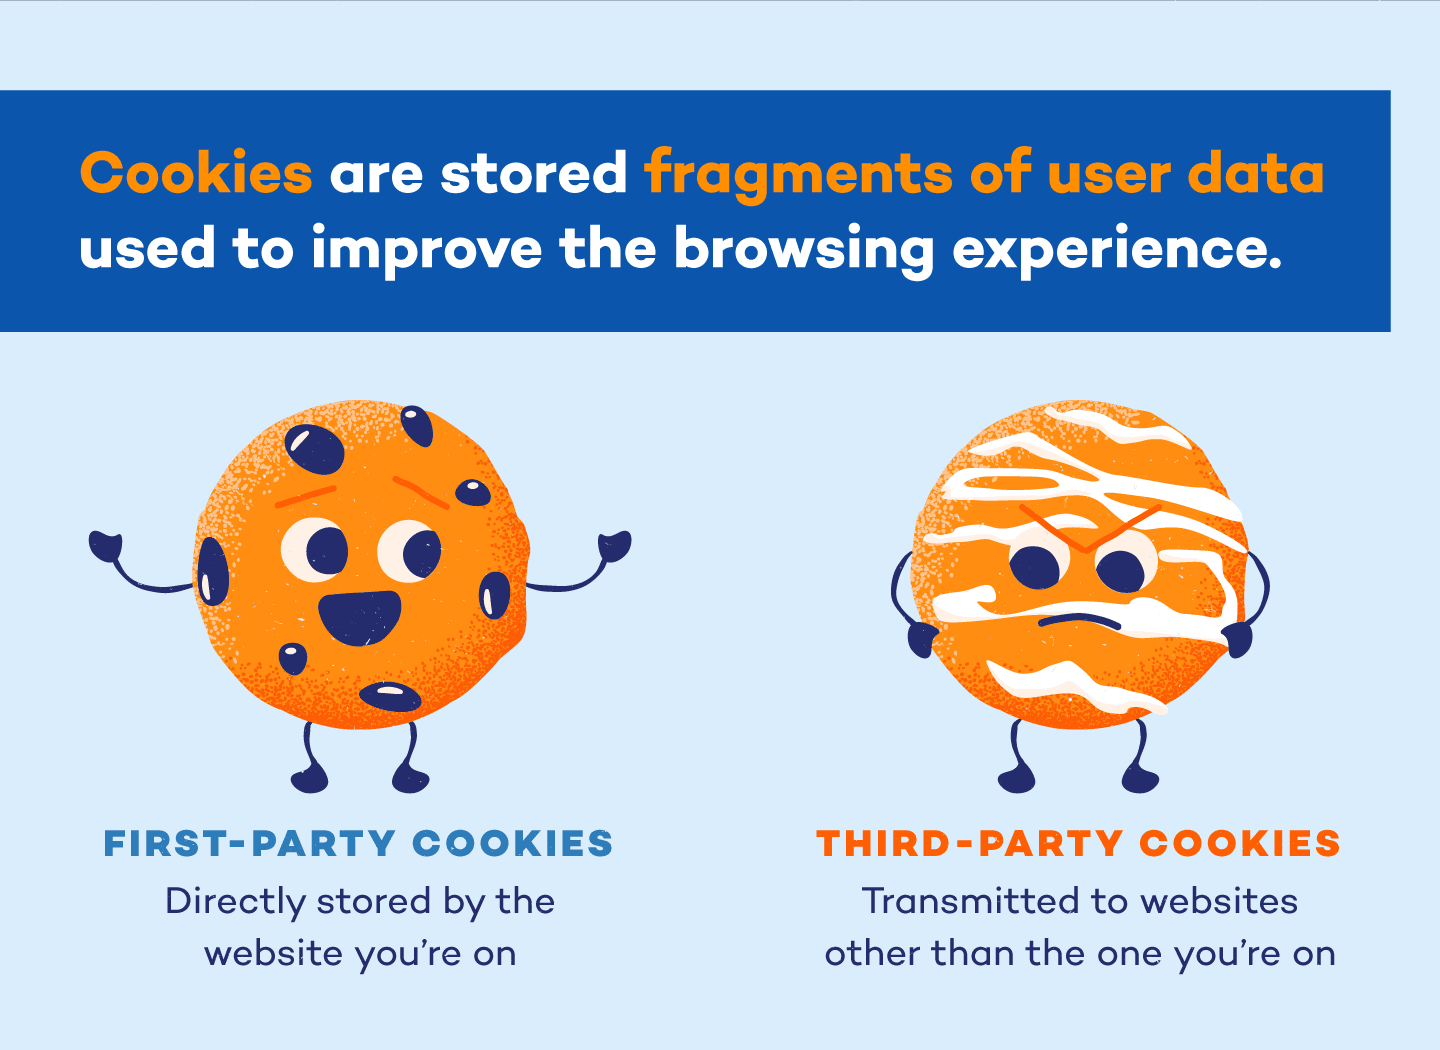 An image showing first party and third party cookies